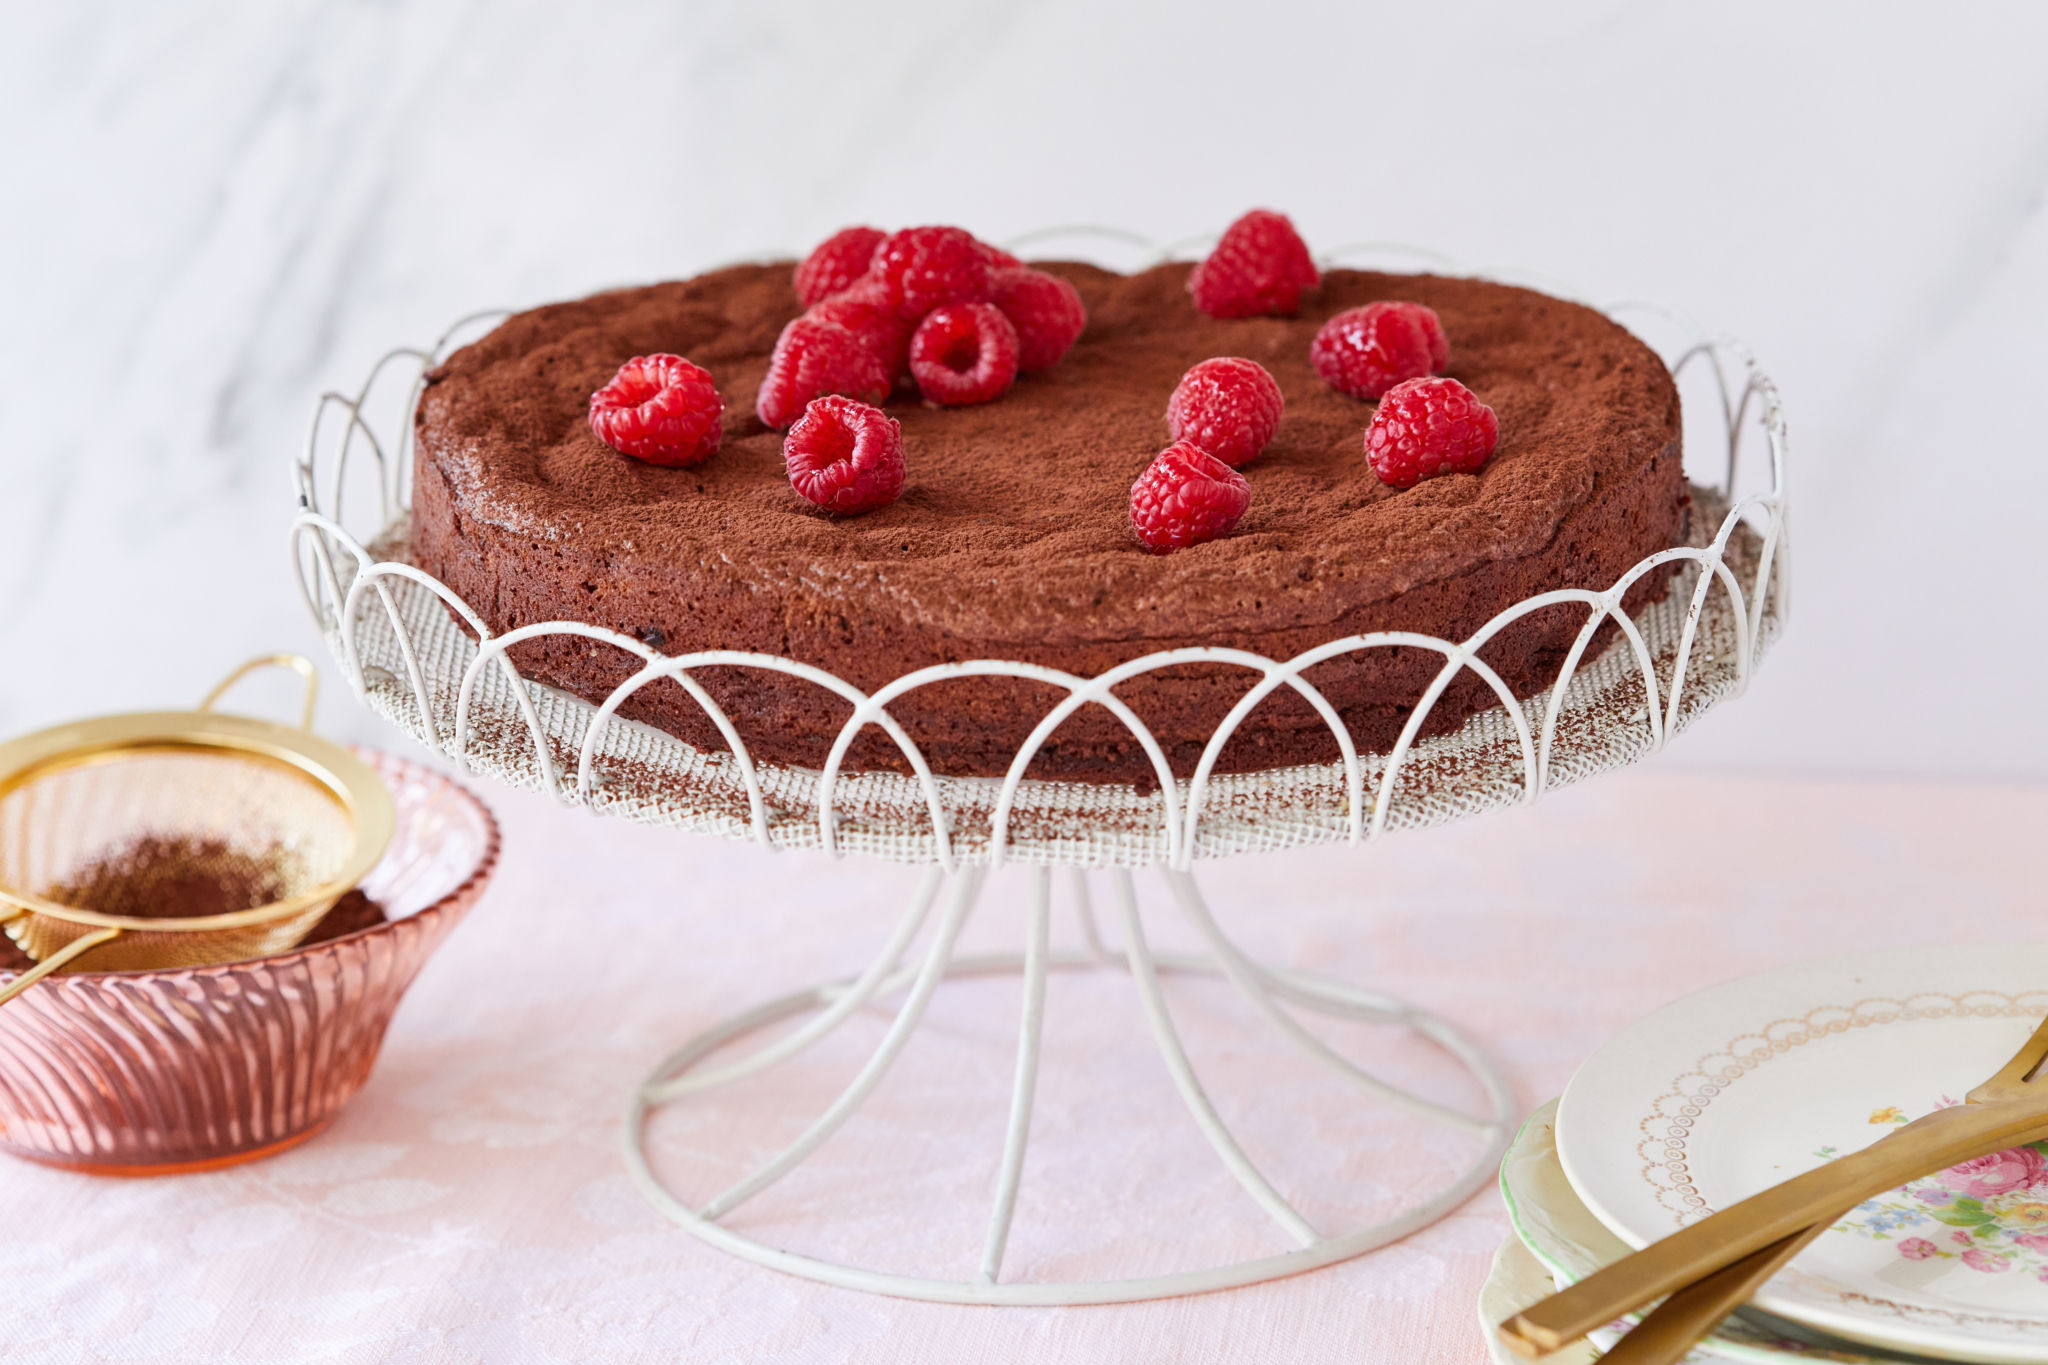 Flourless Chocolate Almond Torte topped with raspberries